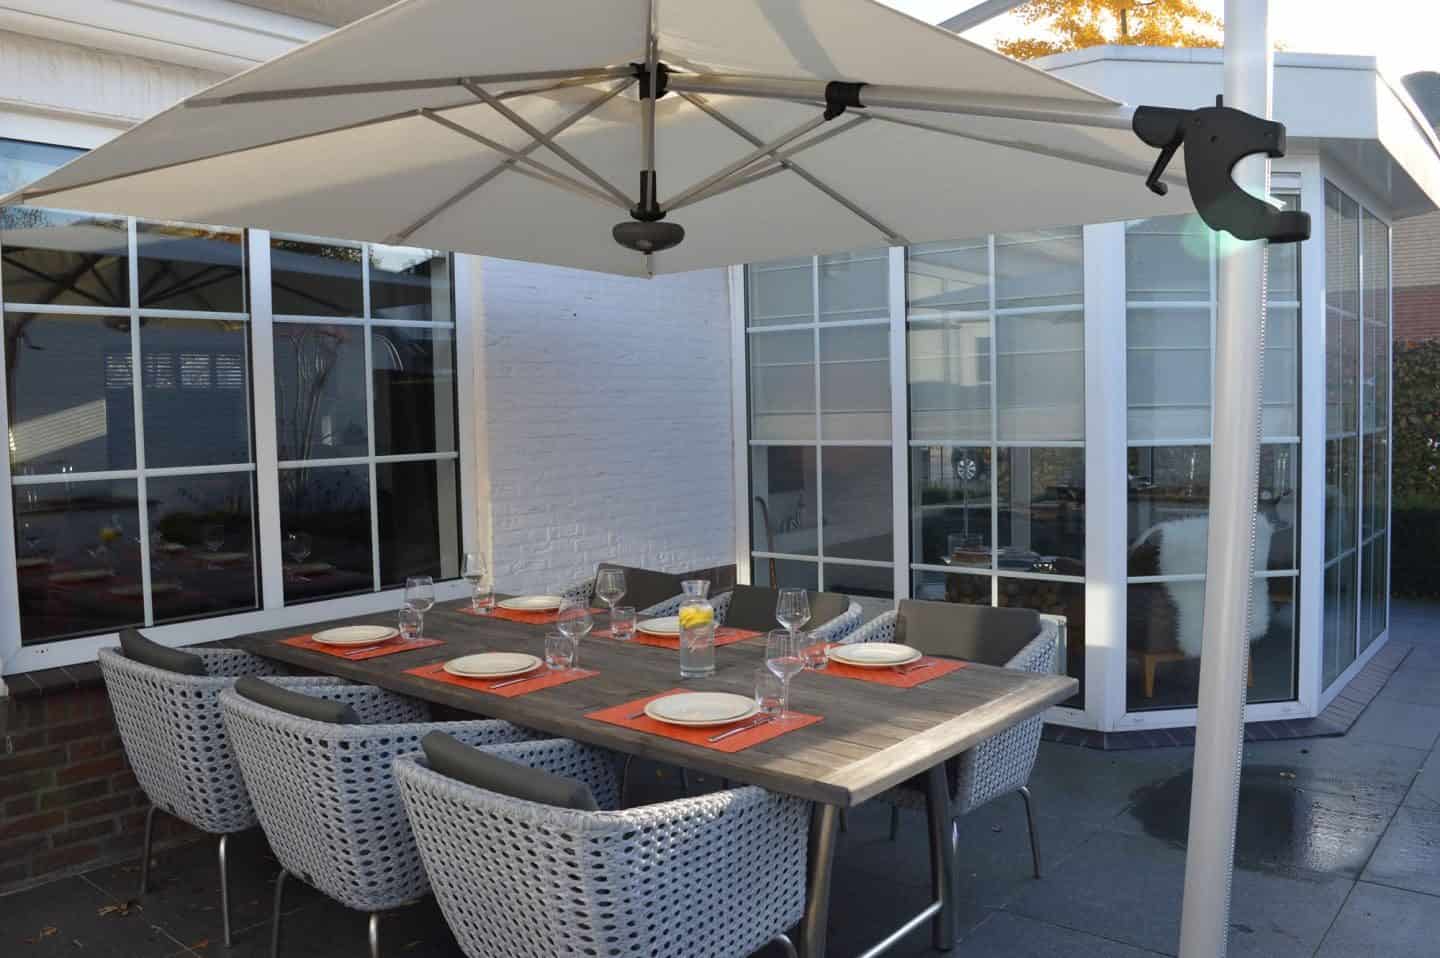 Garden Parasol from Solero Parasols.  Large square cantilvered parasol above an outdoor dining set.  